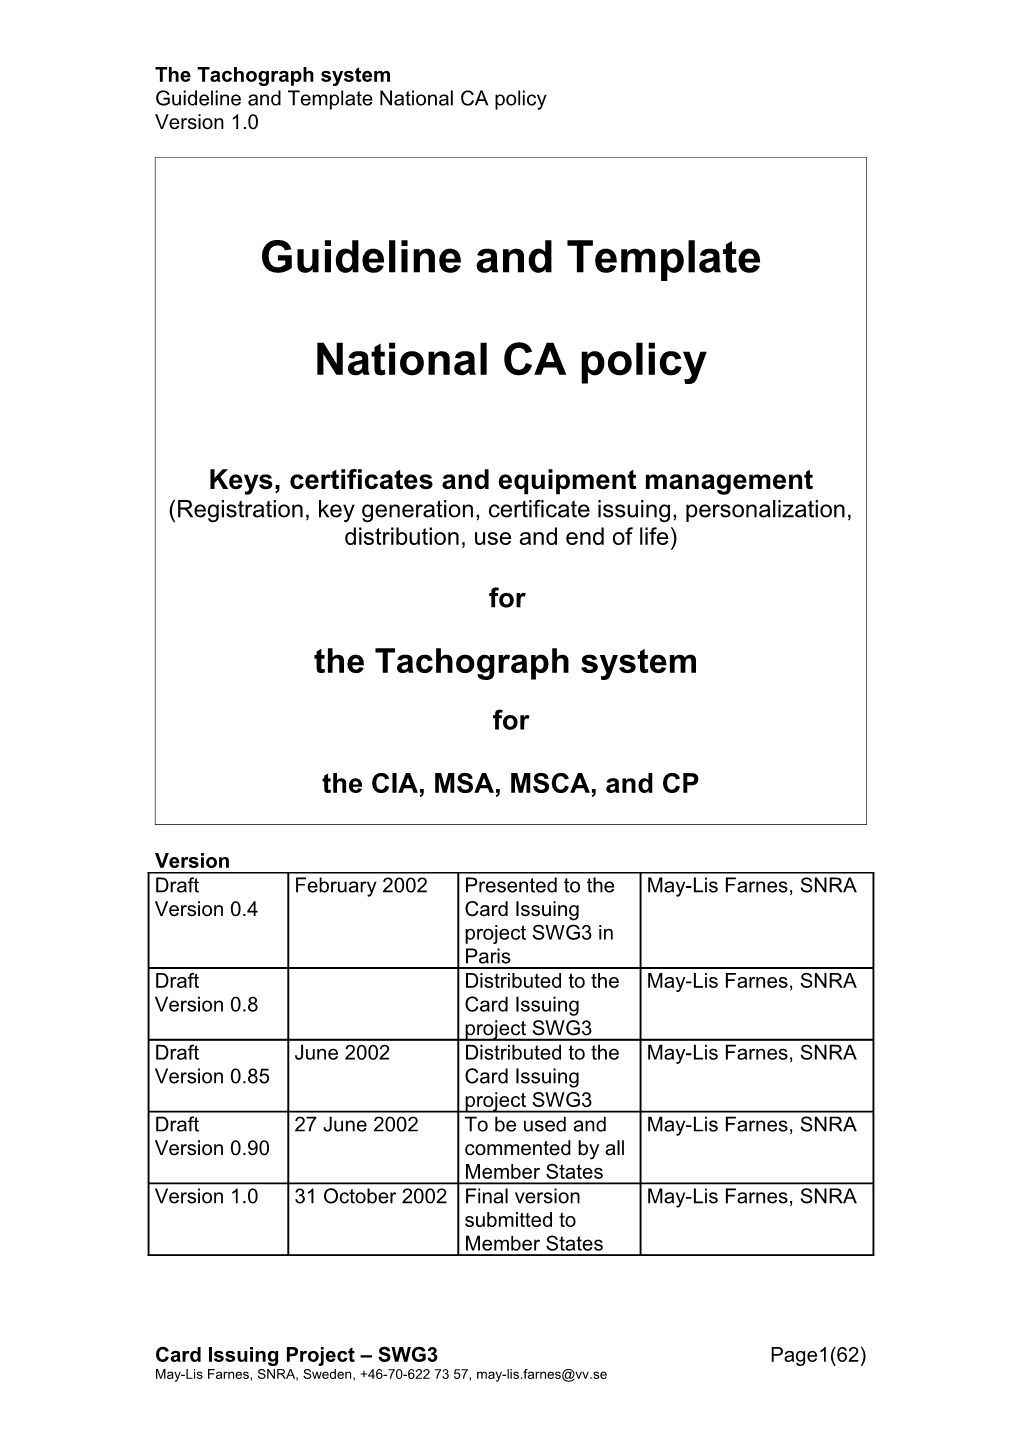 Guideline and Template